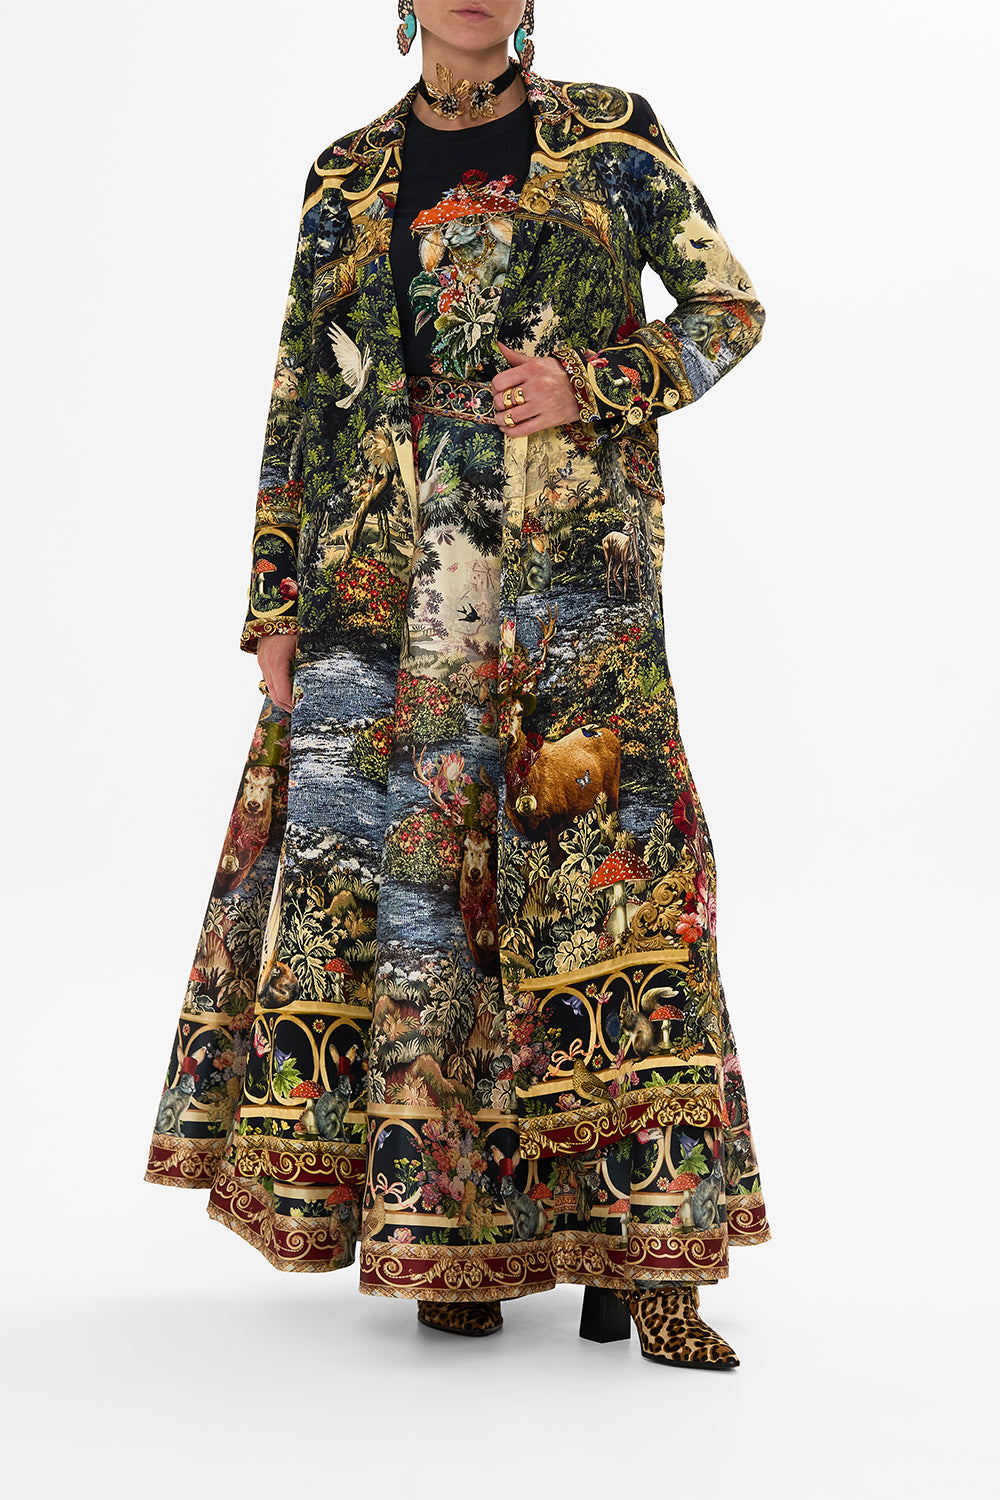 COAT WITH WIDE CUFFS AND SHORT SIDE SPLITS TAPESTRY TOTEMS